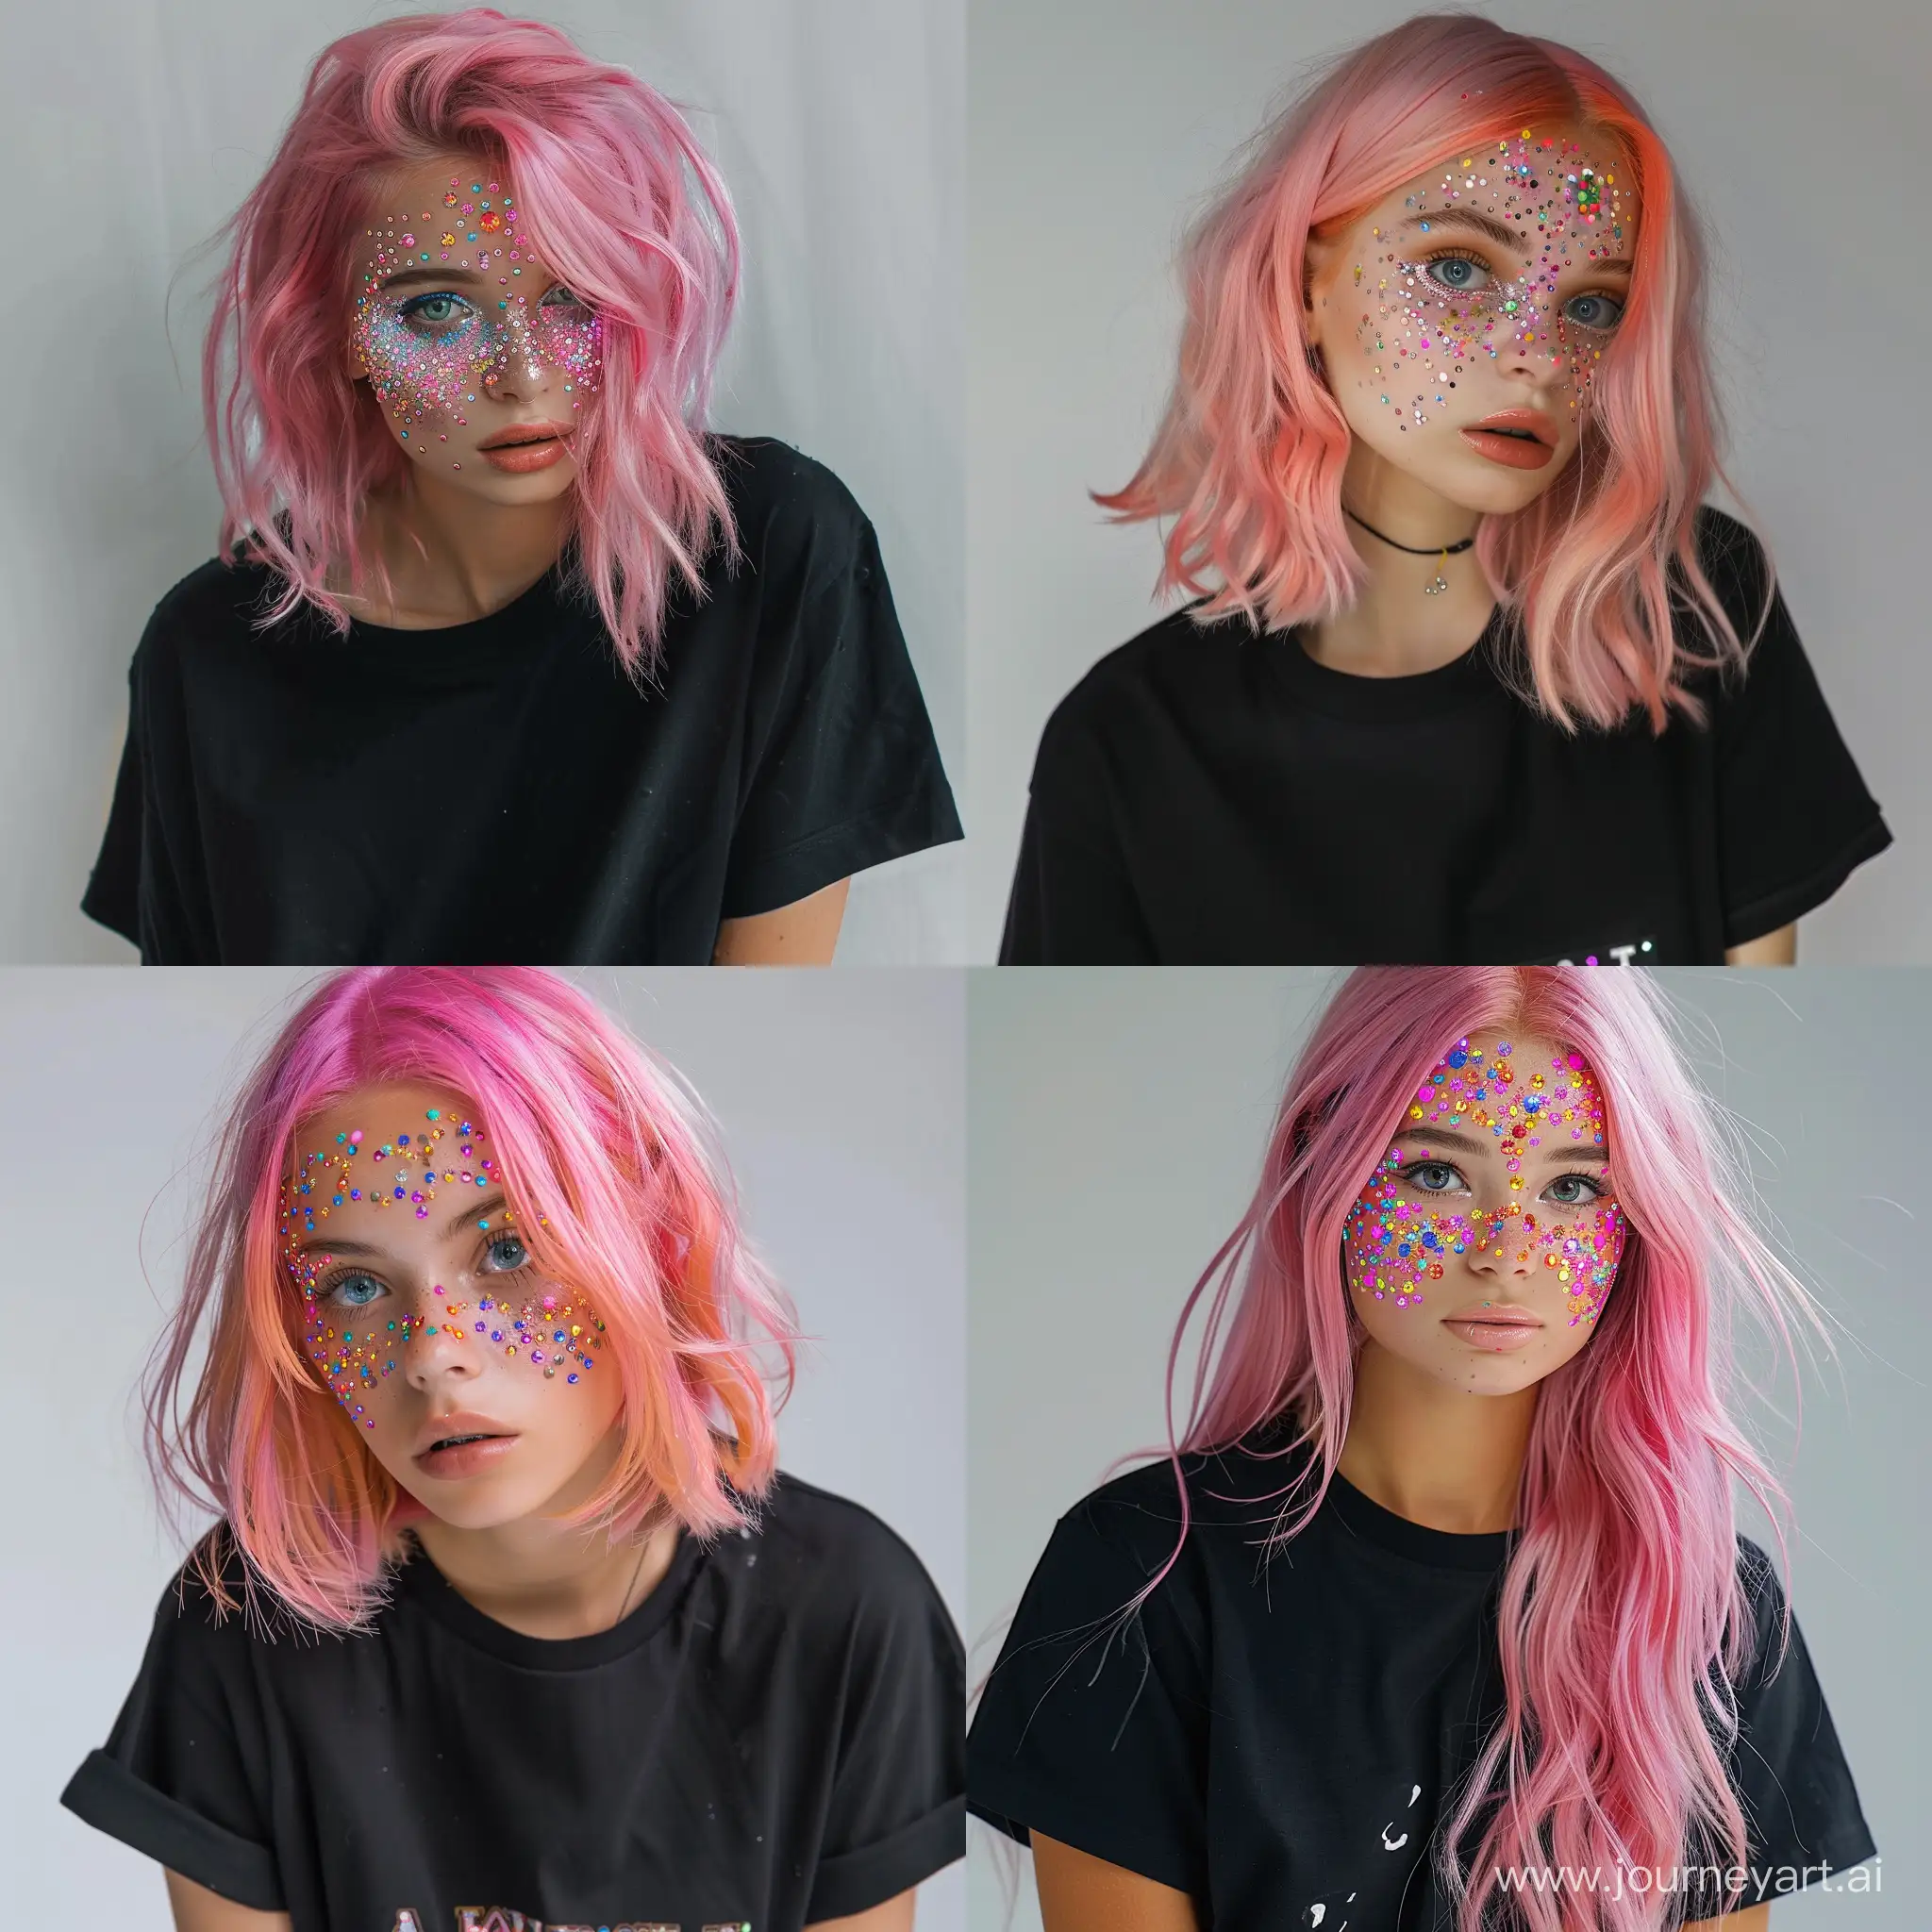 girl with pink hair and rhinestones on her face and wearing a black T-shirt, high detail